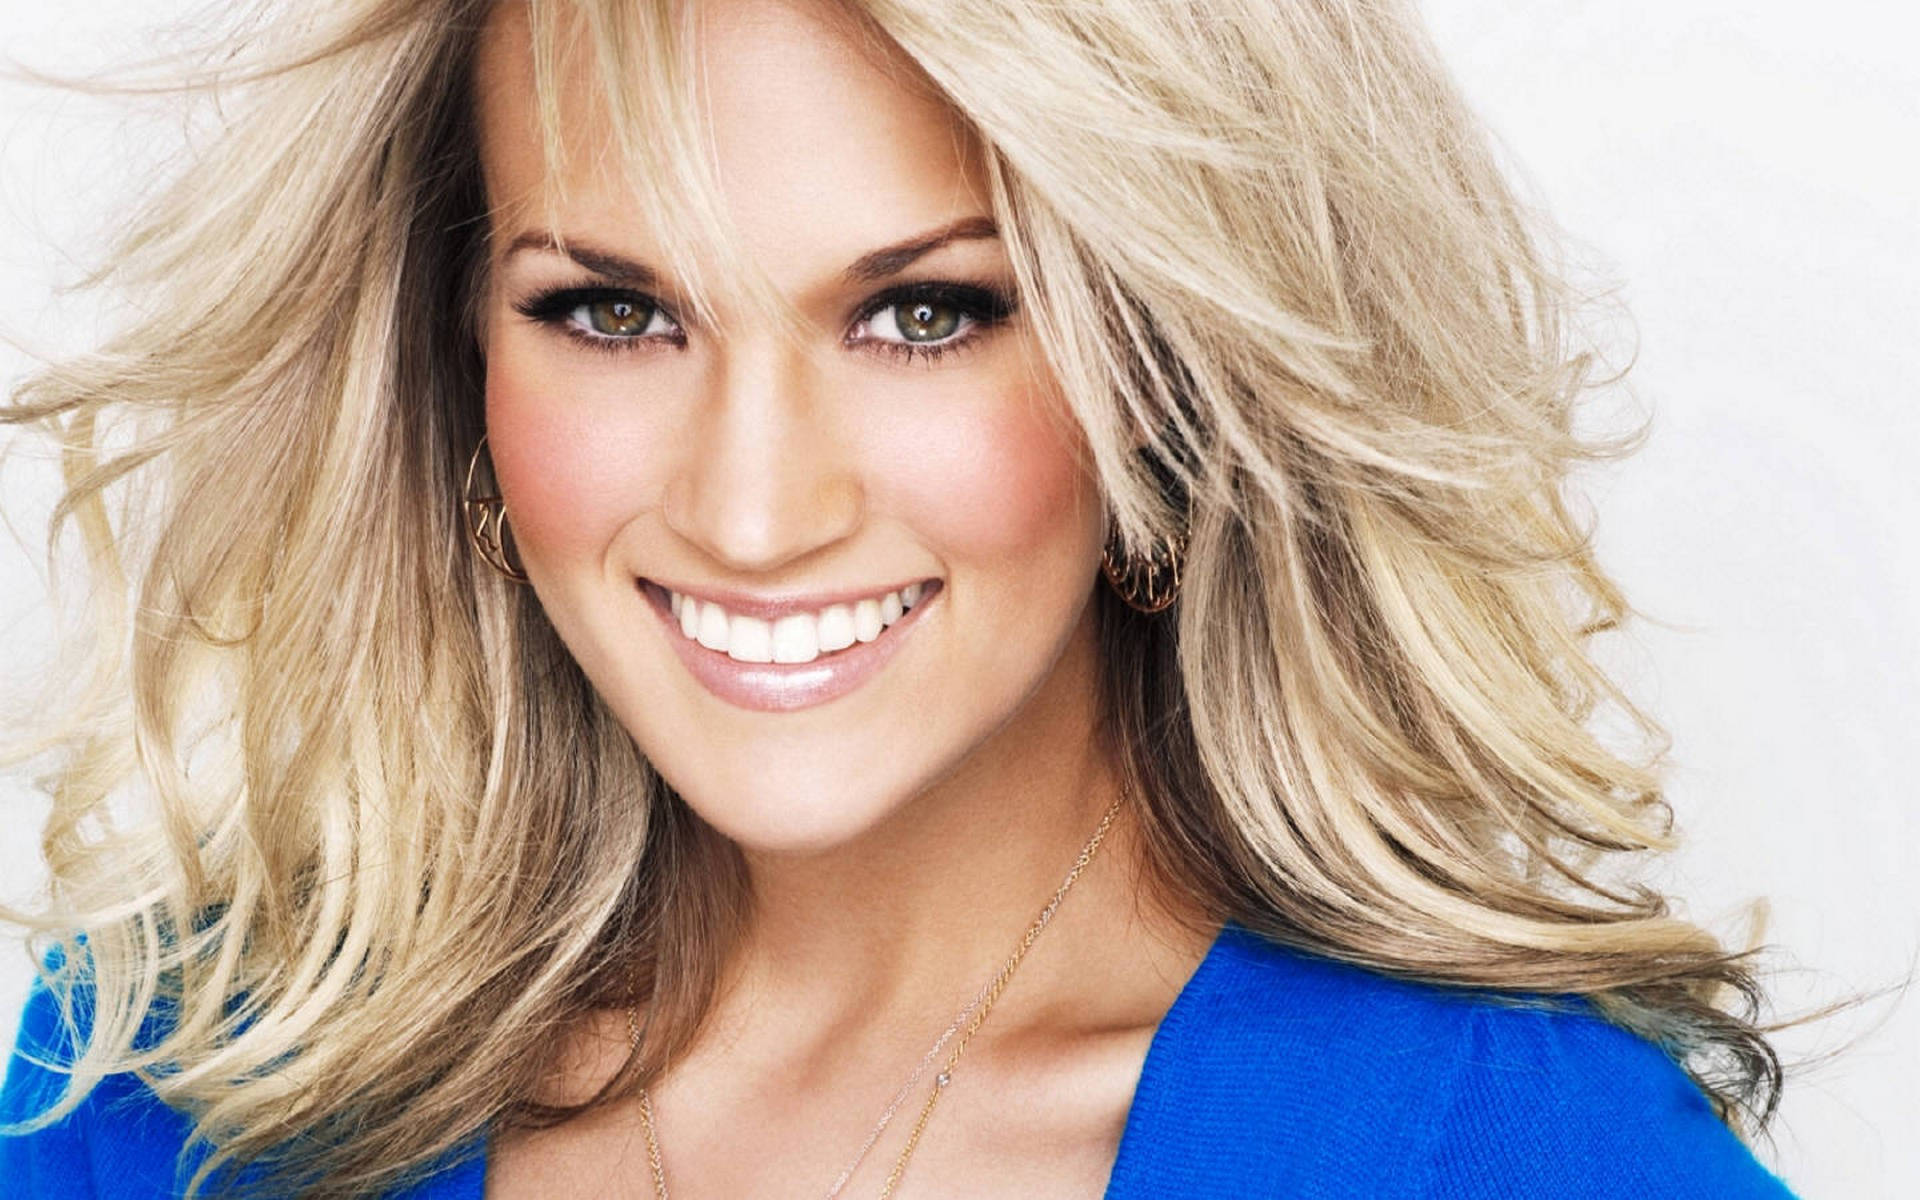 Carrie Underwood Stunning Smile Background